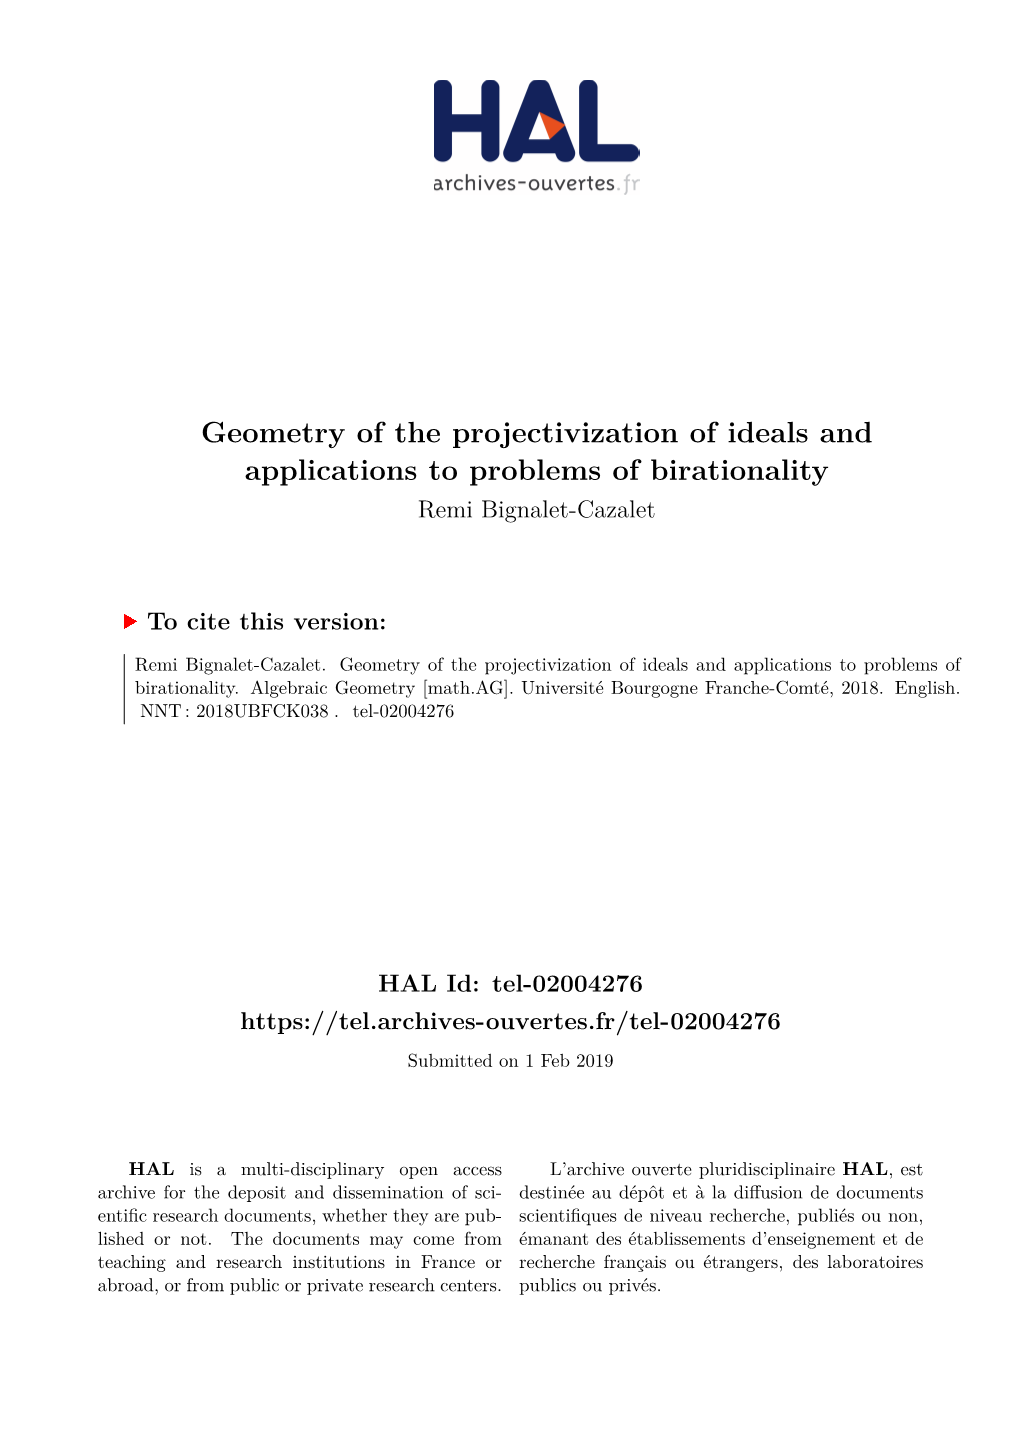 Geometry of the Projectivization of Ideals and Applications to Problems of Birationality Remi Bignalet-Cazalet